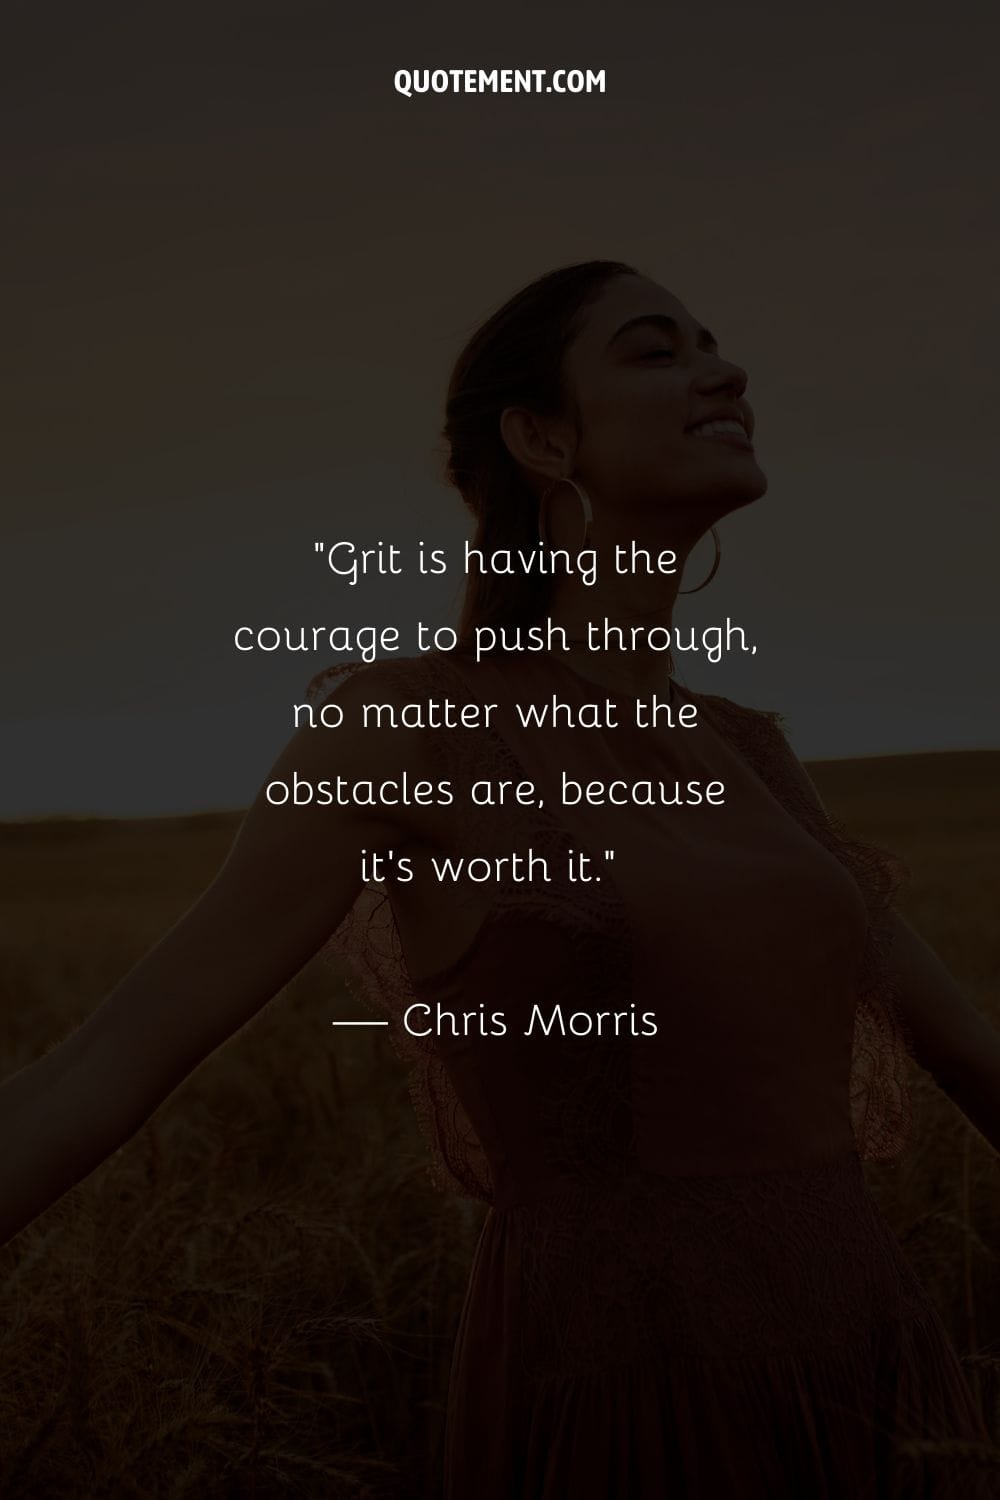 Grit is having the courage to push through, no matter what the obstacles are, because it’s worth it